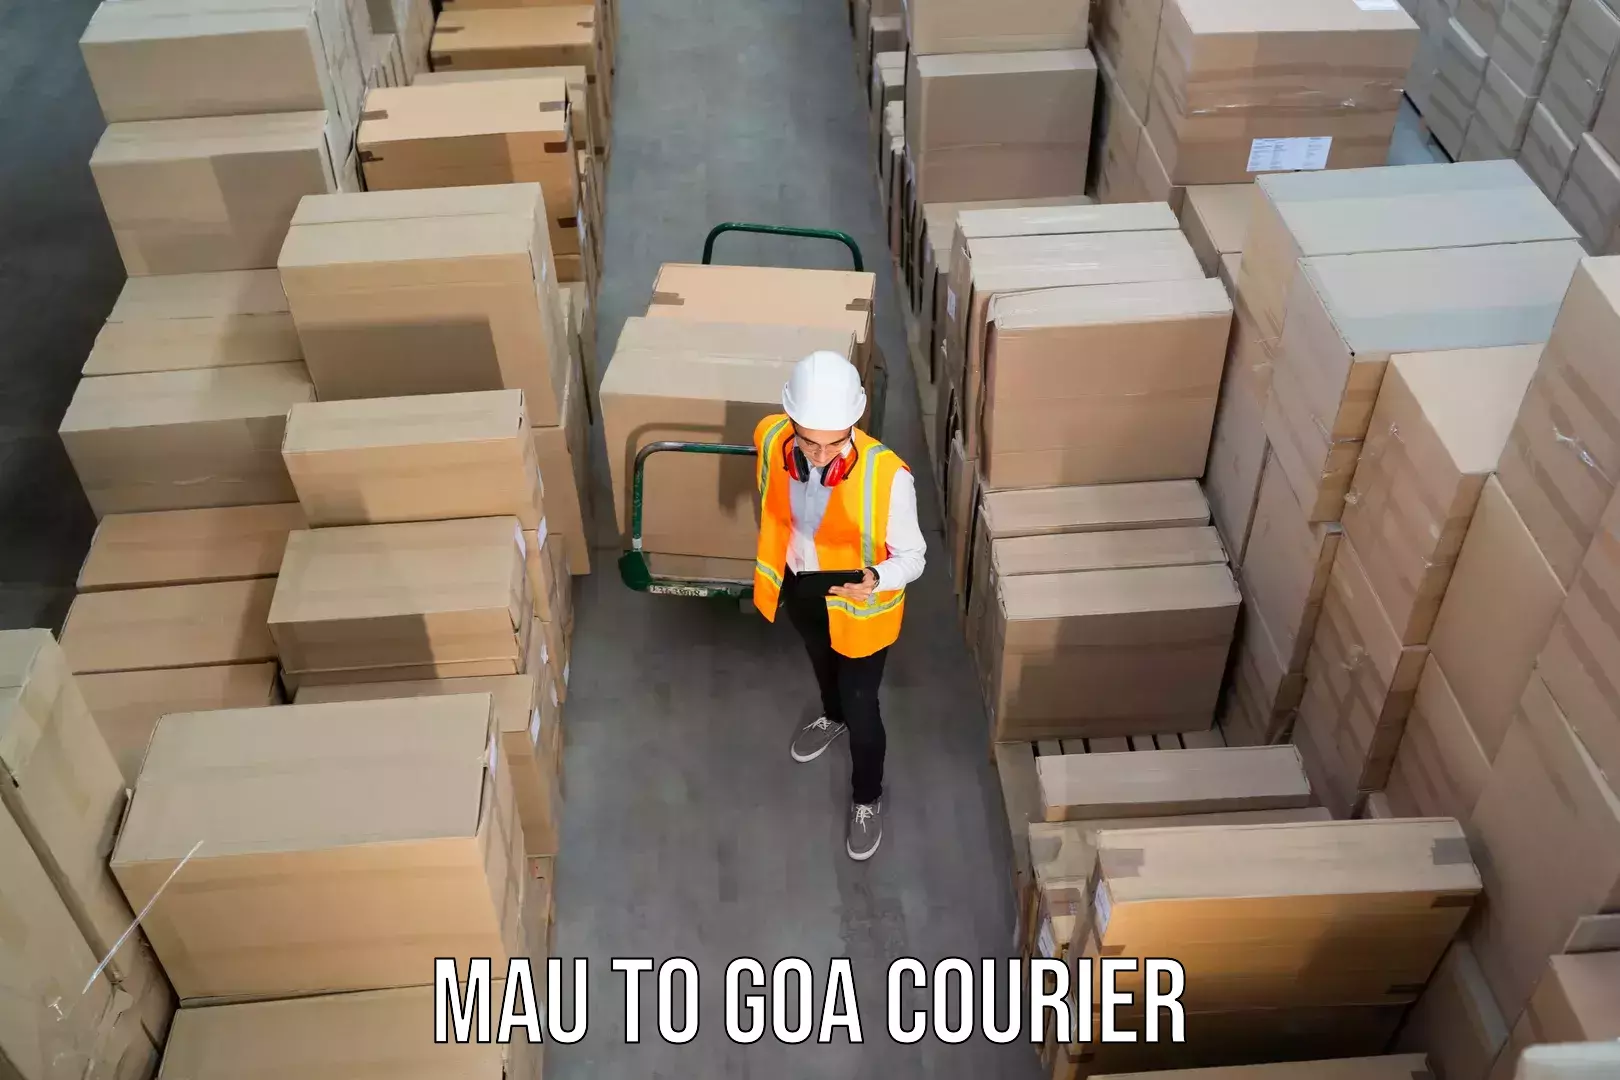 User-friendly delivery service Mau to Goa University